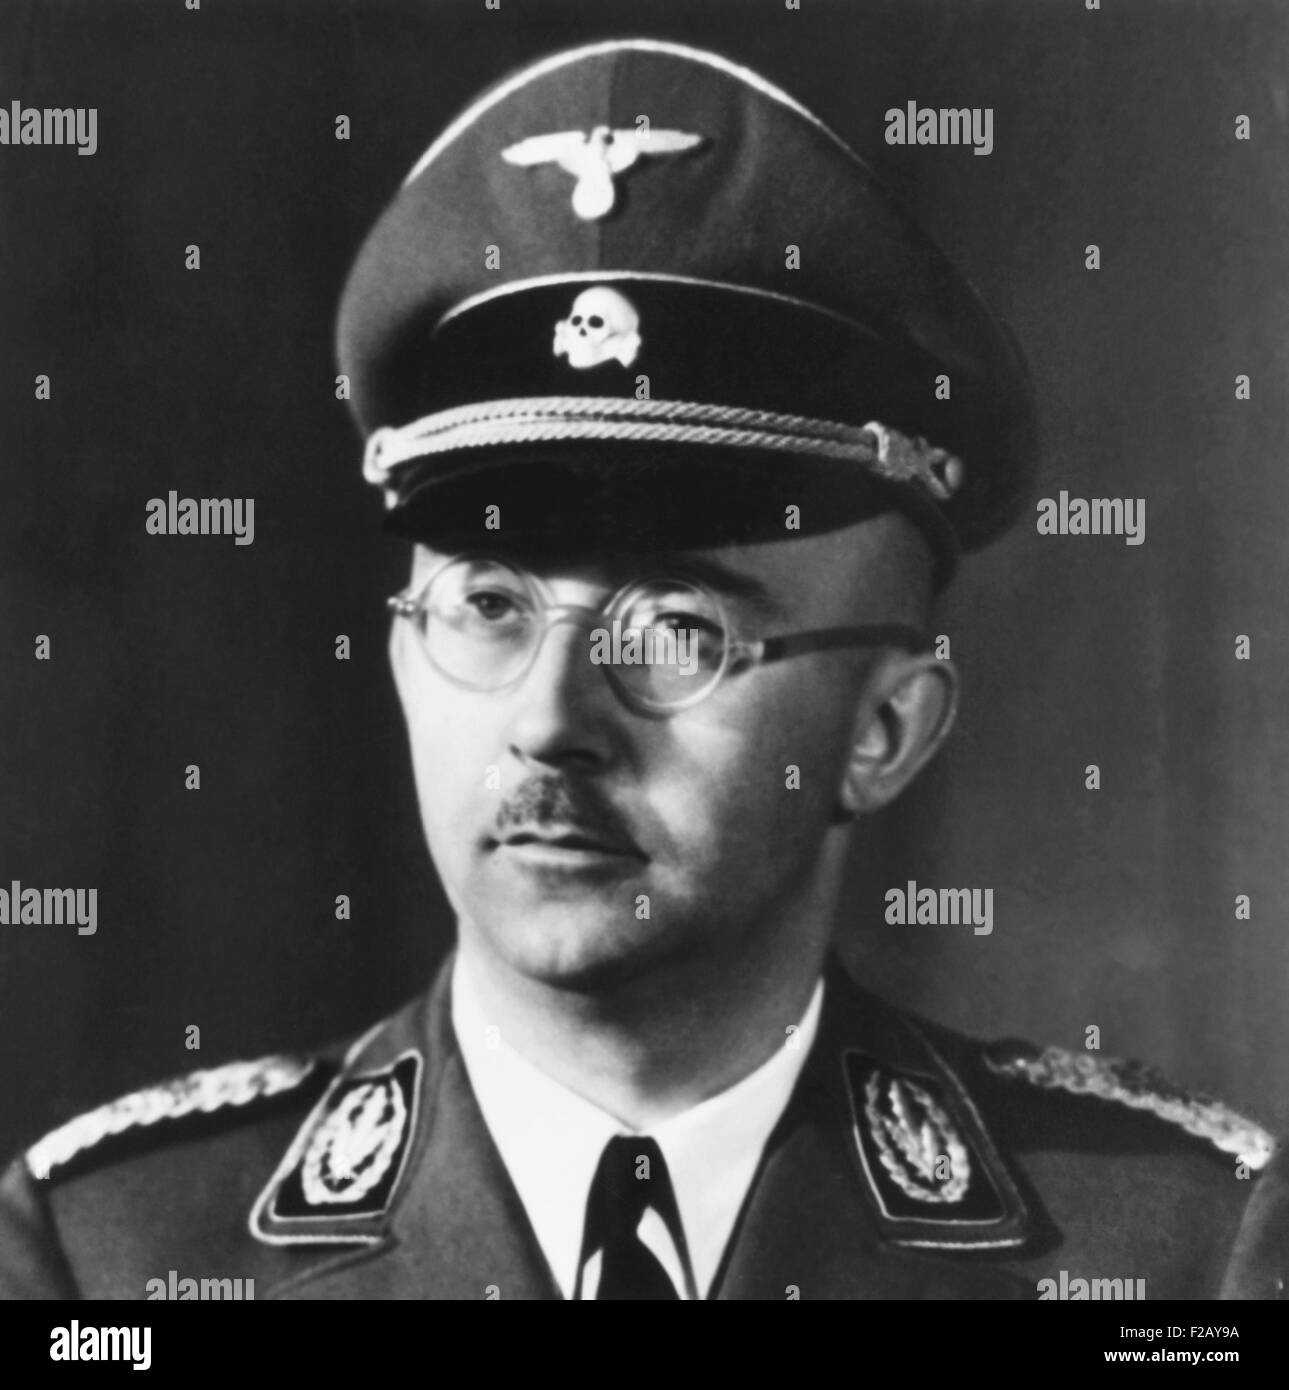 Heinrich Himmler, leader of the Nazi Germany's elite Schutzstaffel or SS. Ca. 1943. The SS was Adolph Hitler's Protection Squadron from 1934-1945. During world War II, Himmler formed the Einsatzgruppen extermination squadrons, and oversaw the extermination camps. (CSU 2015 9 836) Stock Photo